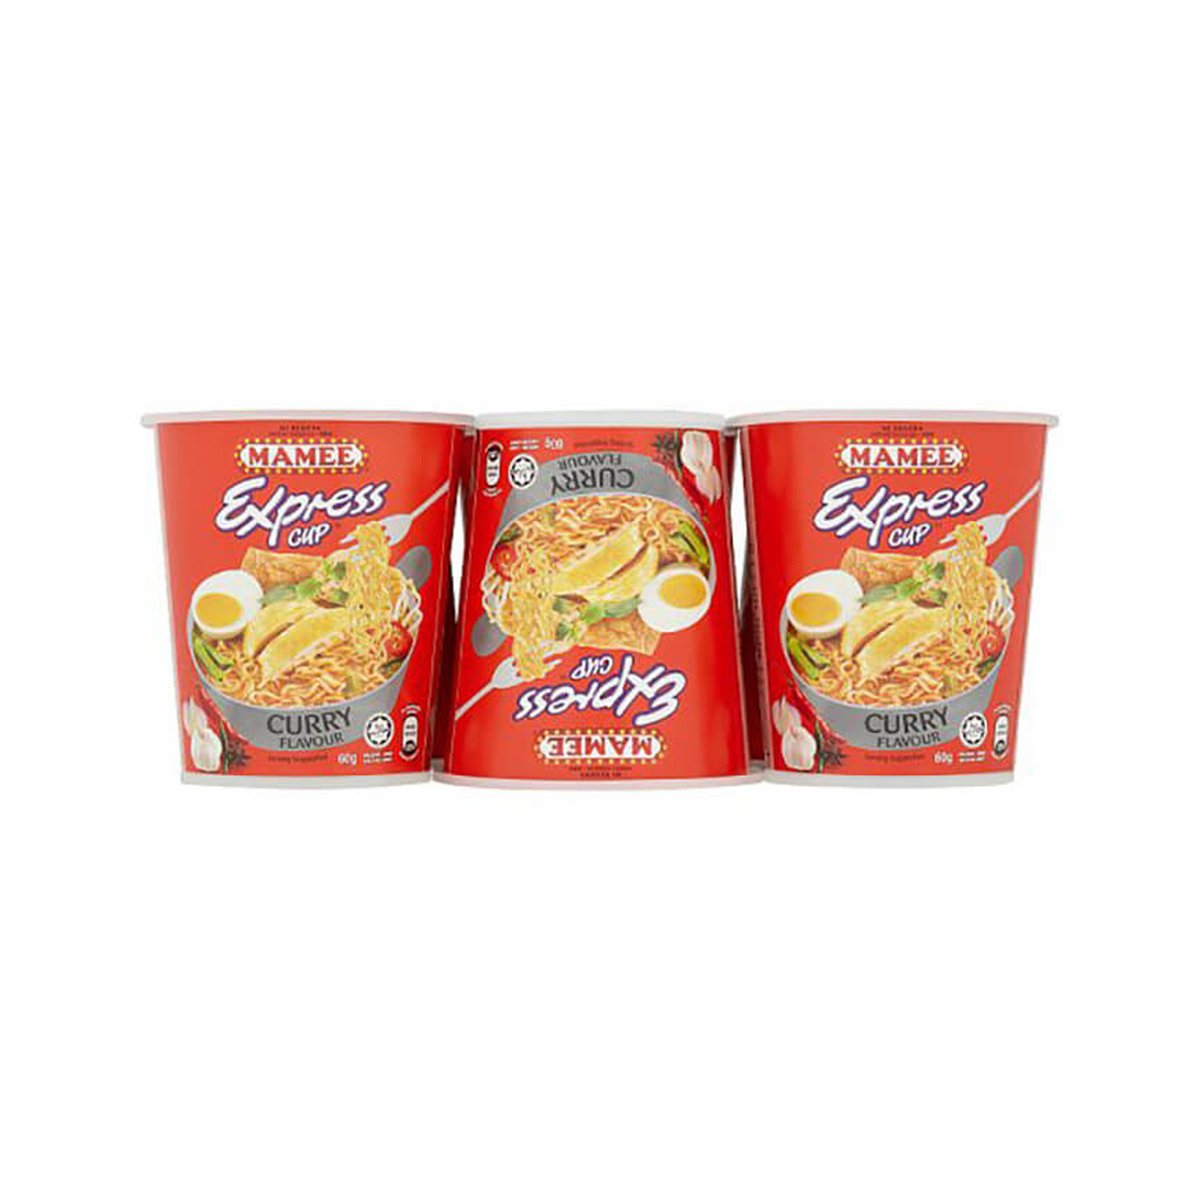 Mamee Express Cup Curry 6 x 60g